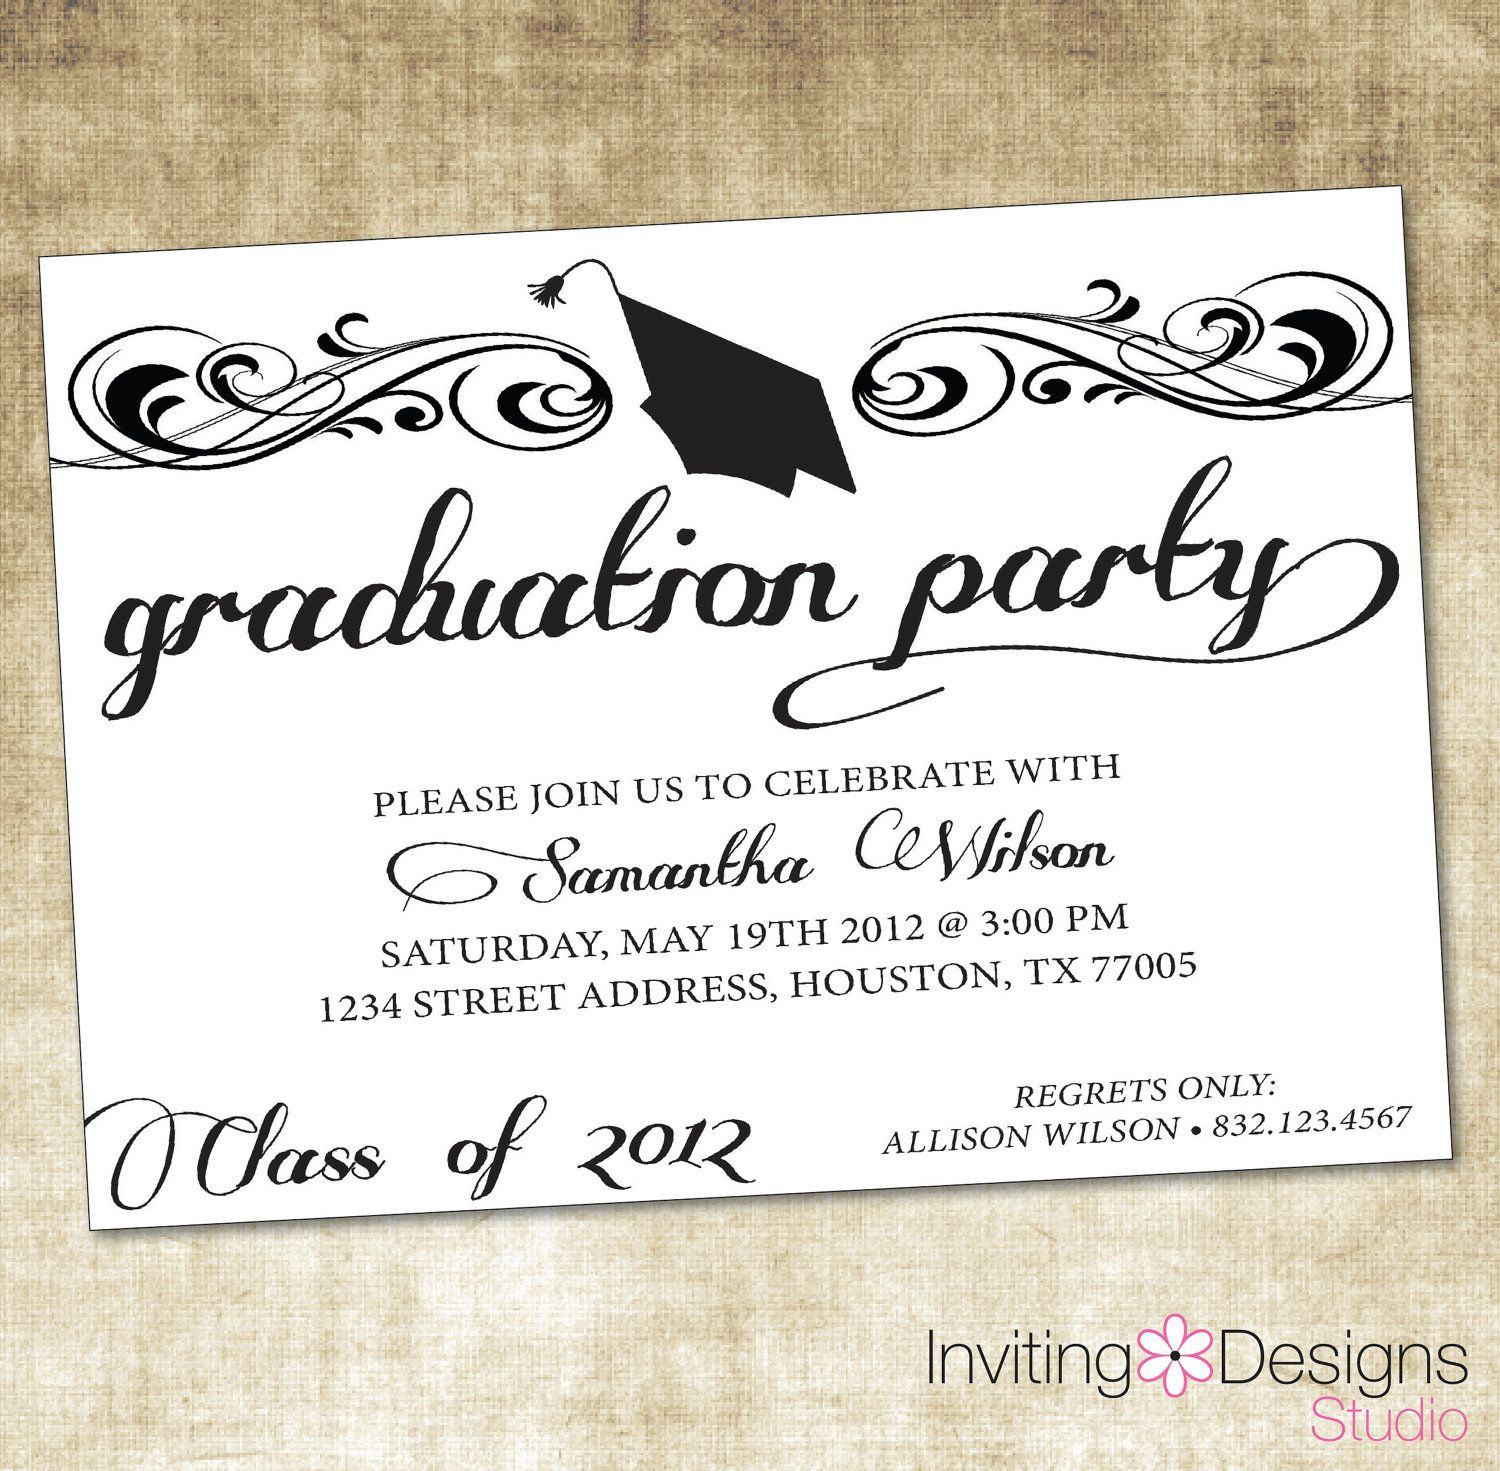 Graduate Invites Glamorous Grad Party Invites To Design Party pertaining to sizing 1500 X 1471